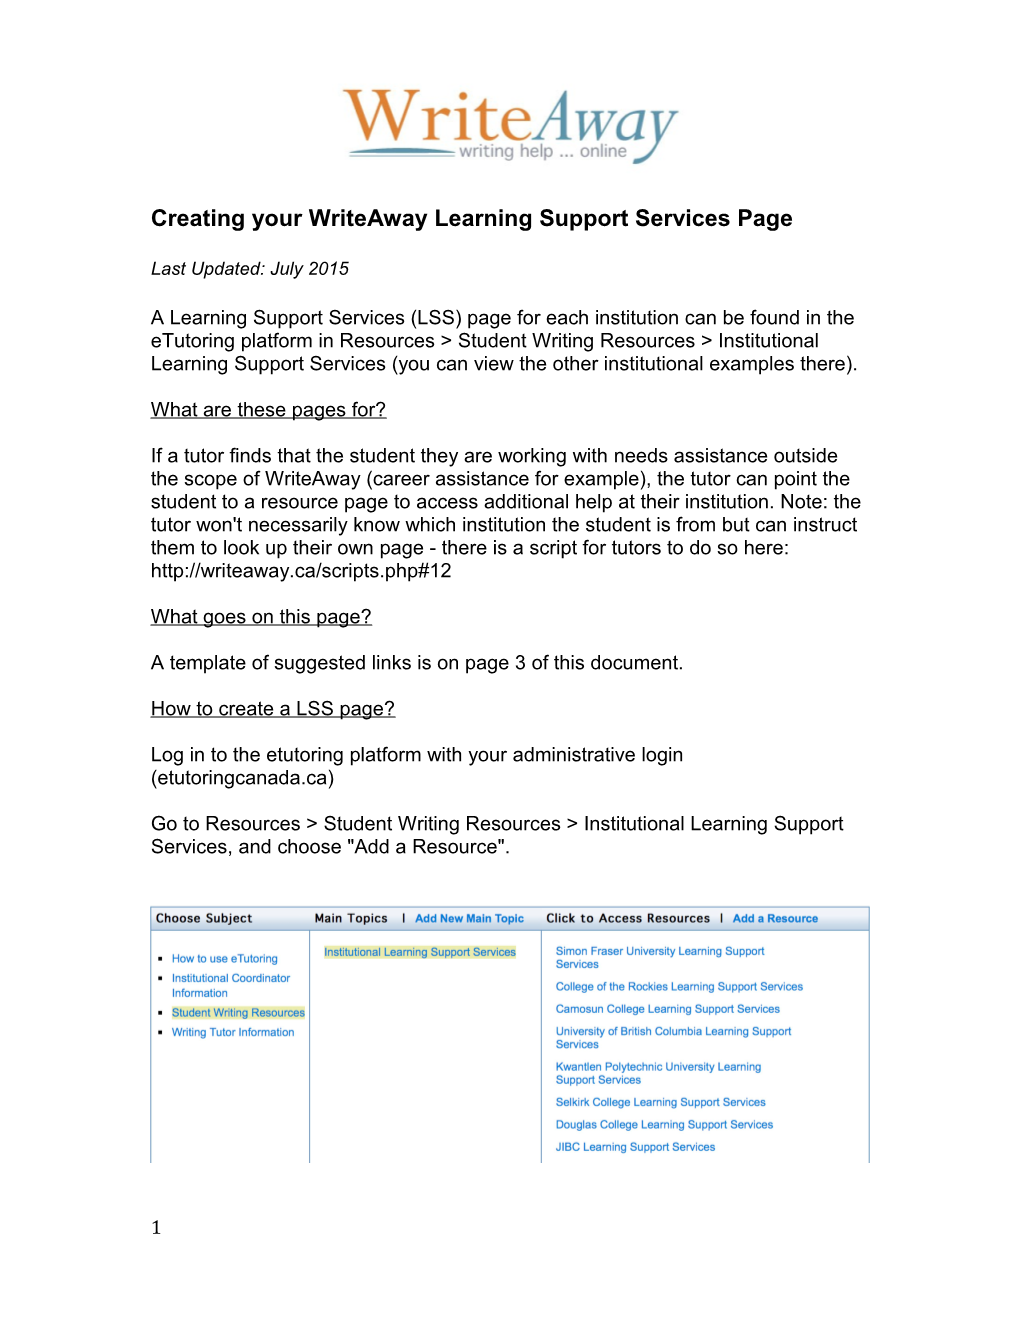 Creating Your Writeaway Learning Support Services Page